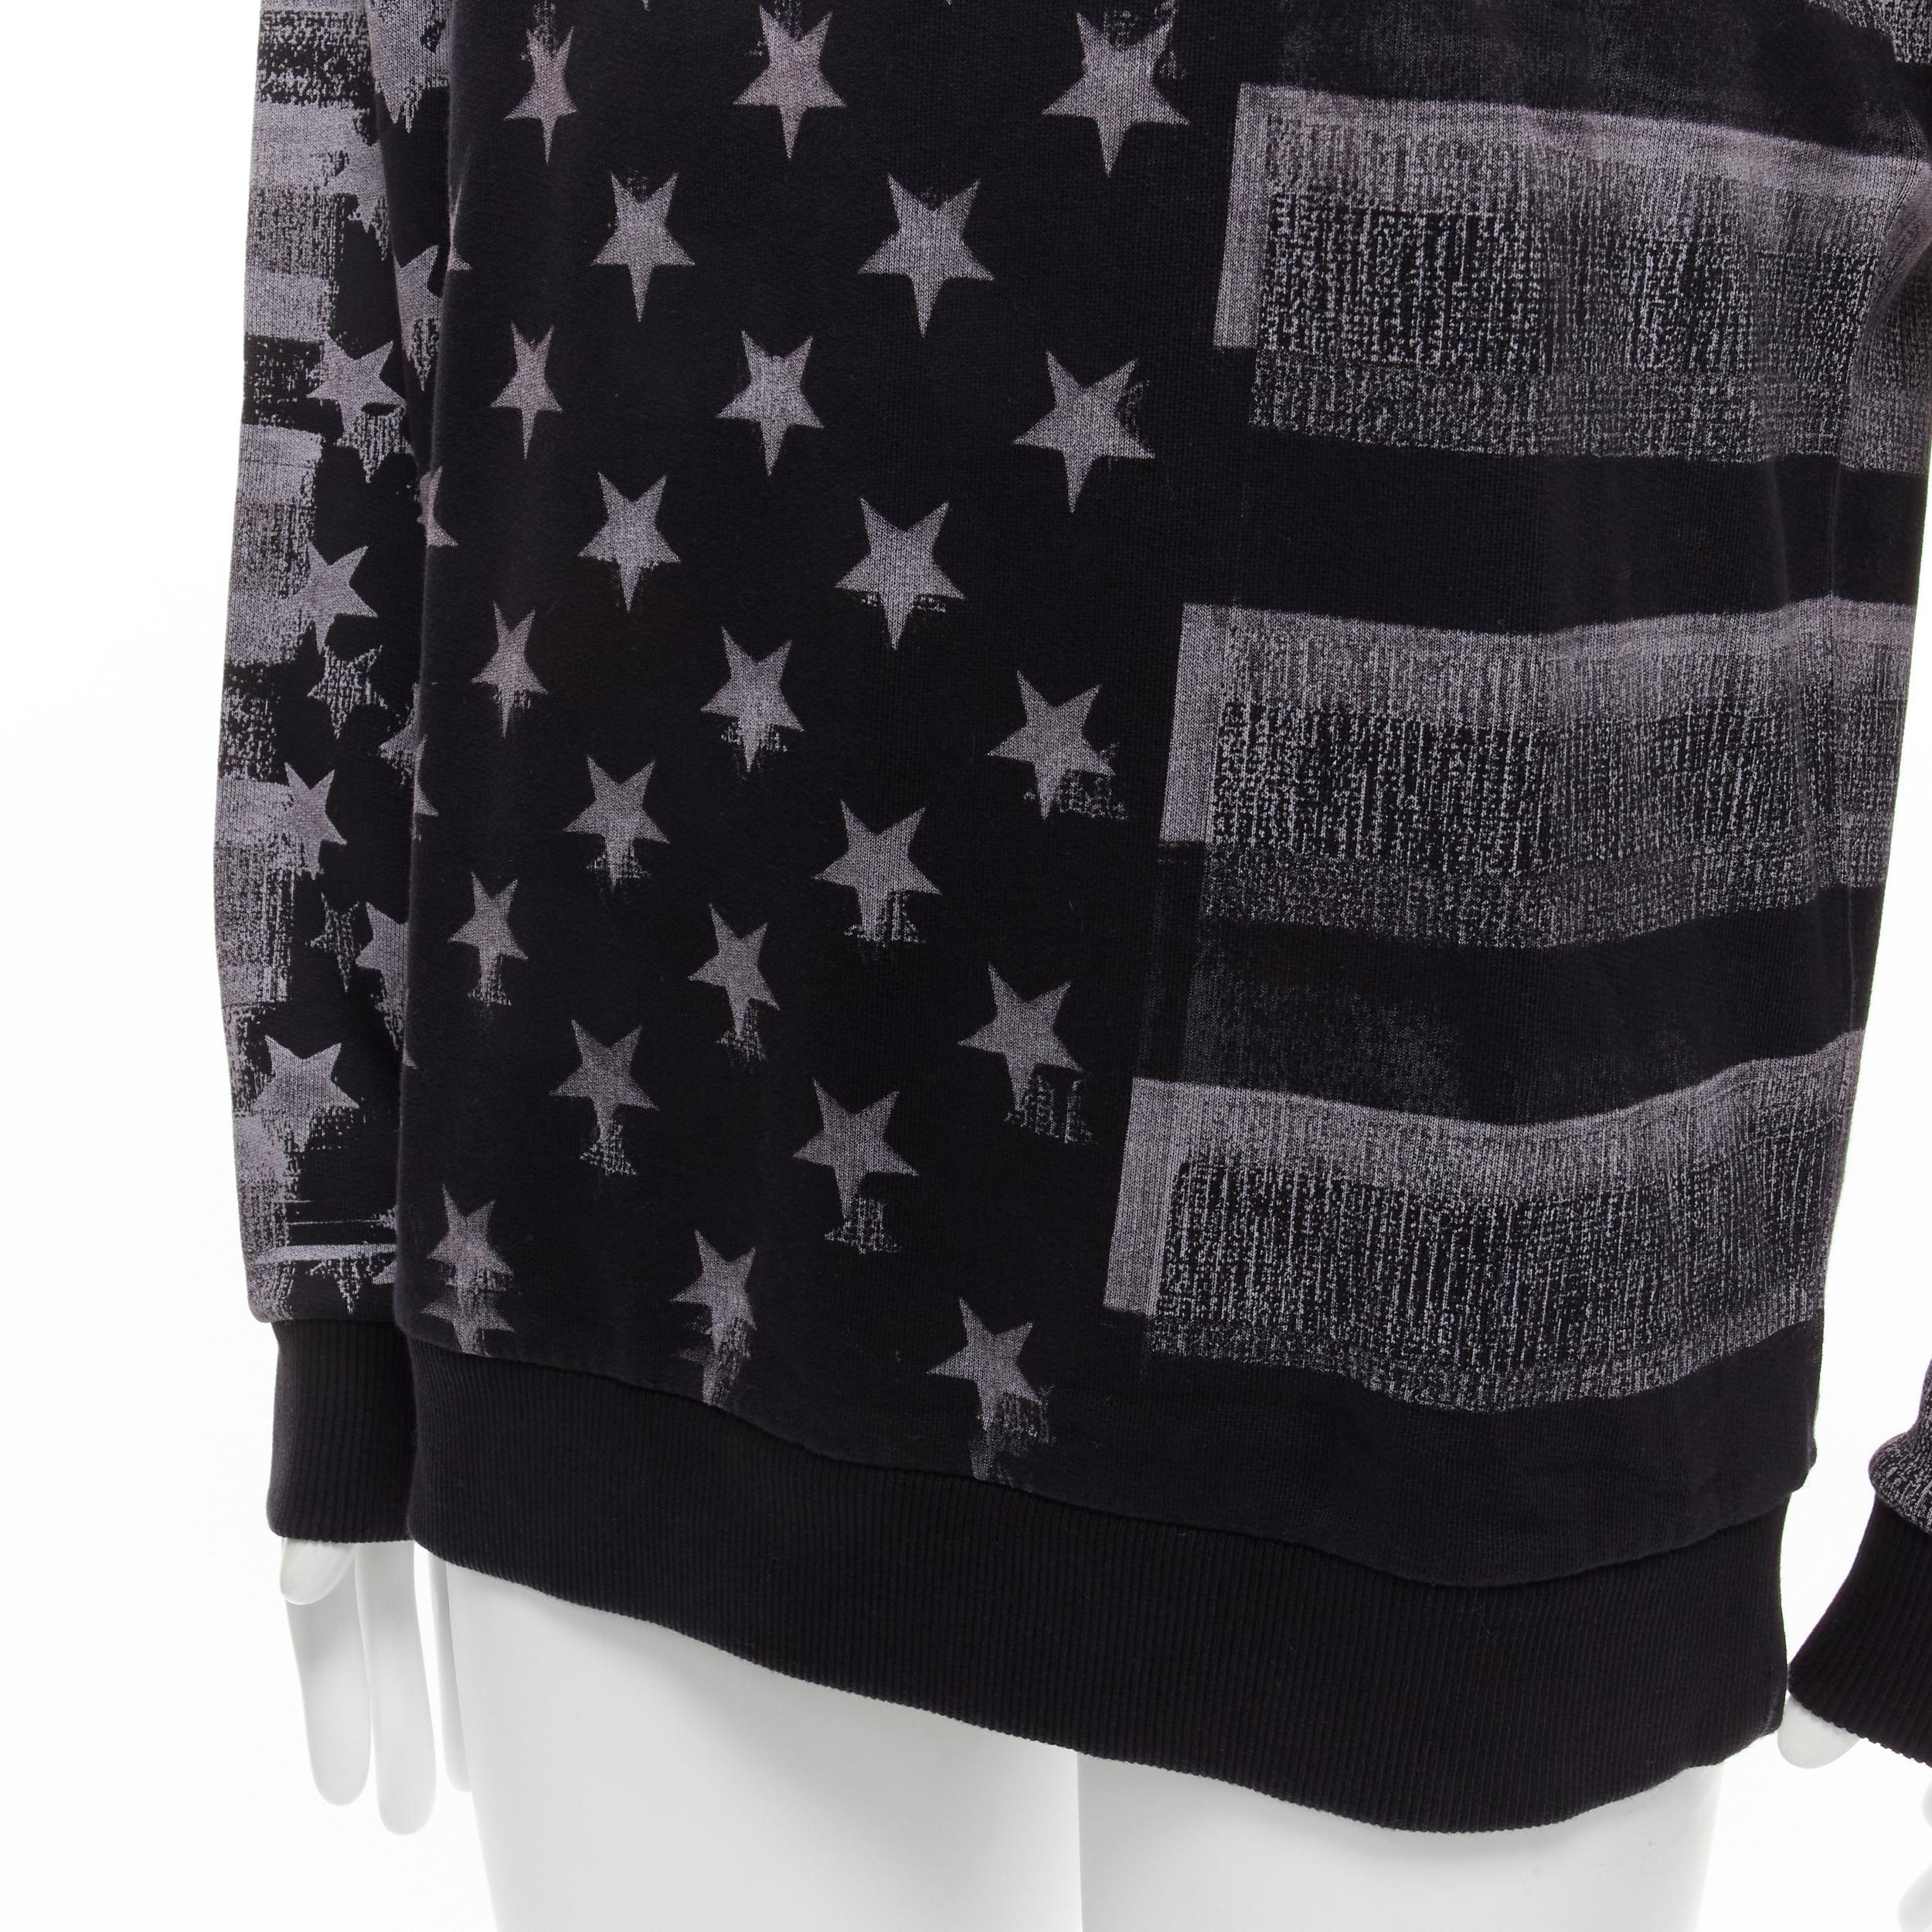 GIVENCHY Riccardo Tisci grey Americana flag distressed cotton crew sweater M
Reference: YNWG/A00111
Brand: Givenchy
Designer: Riccardo Tisci
Material: Cotton
Color: Black, Grey
Pattern: Photographic Print
Closure: Pullover
Made in: